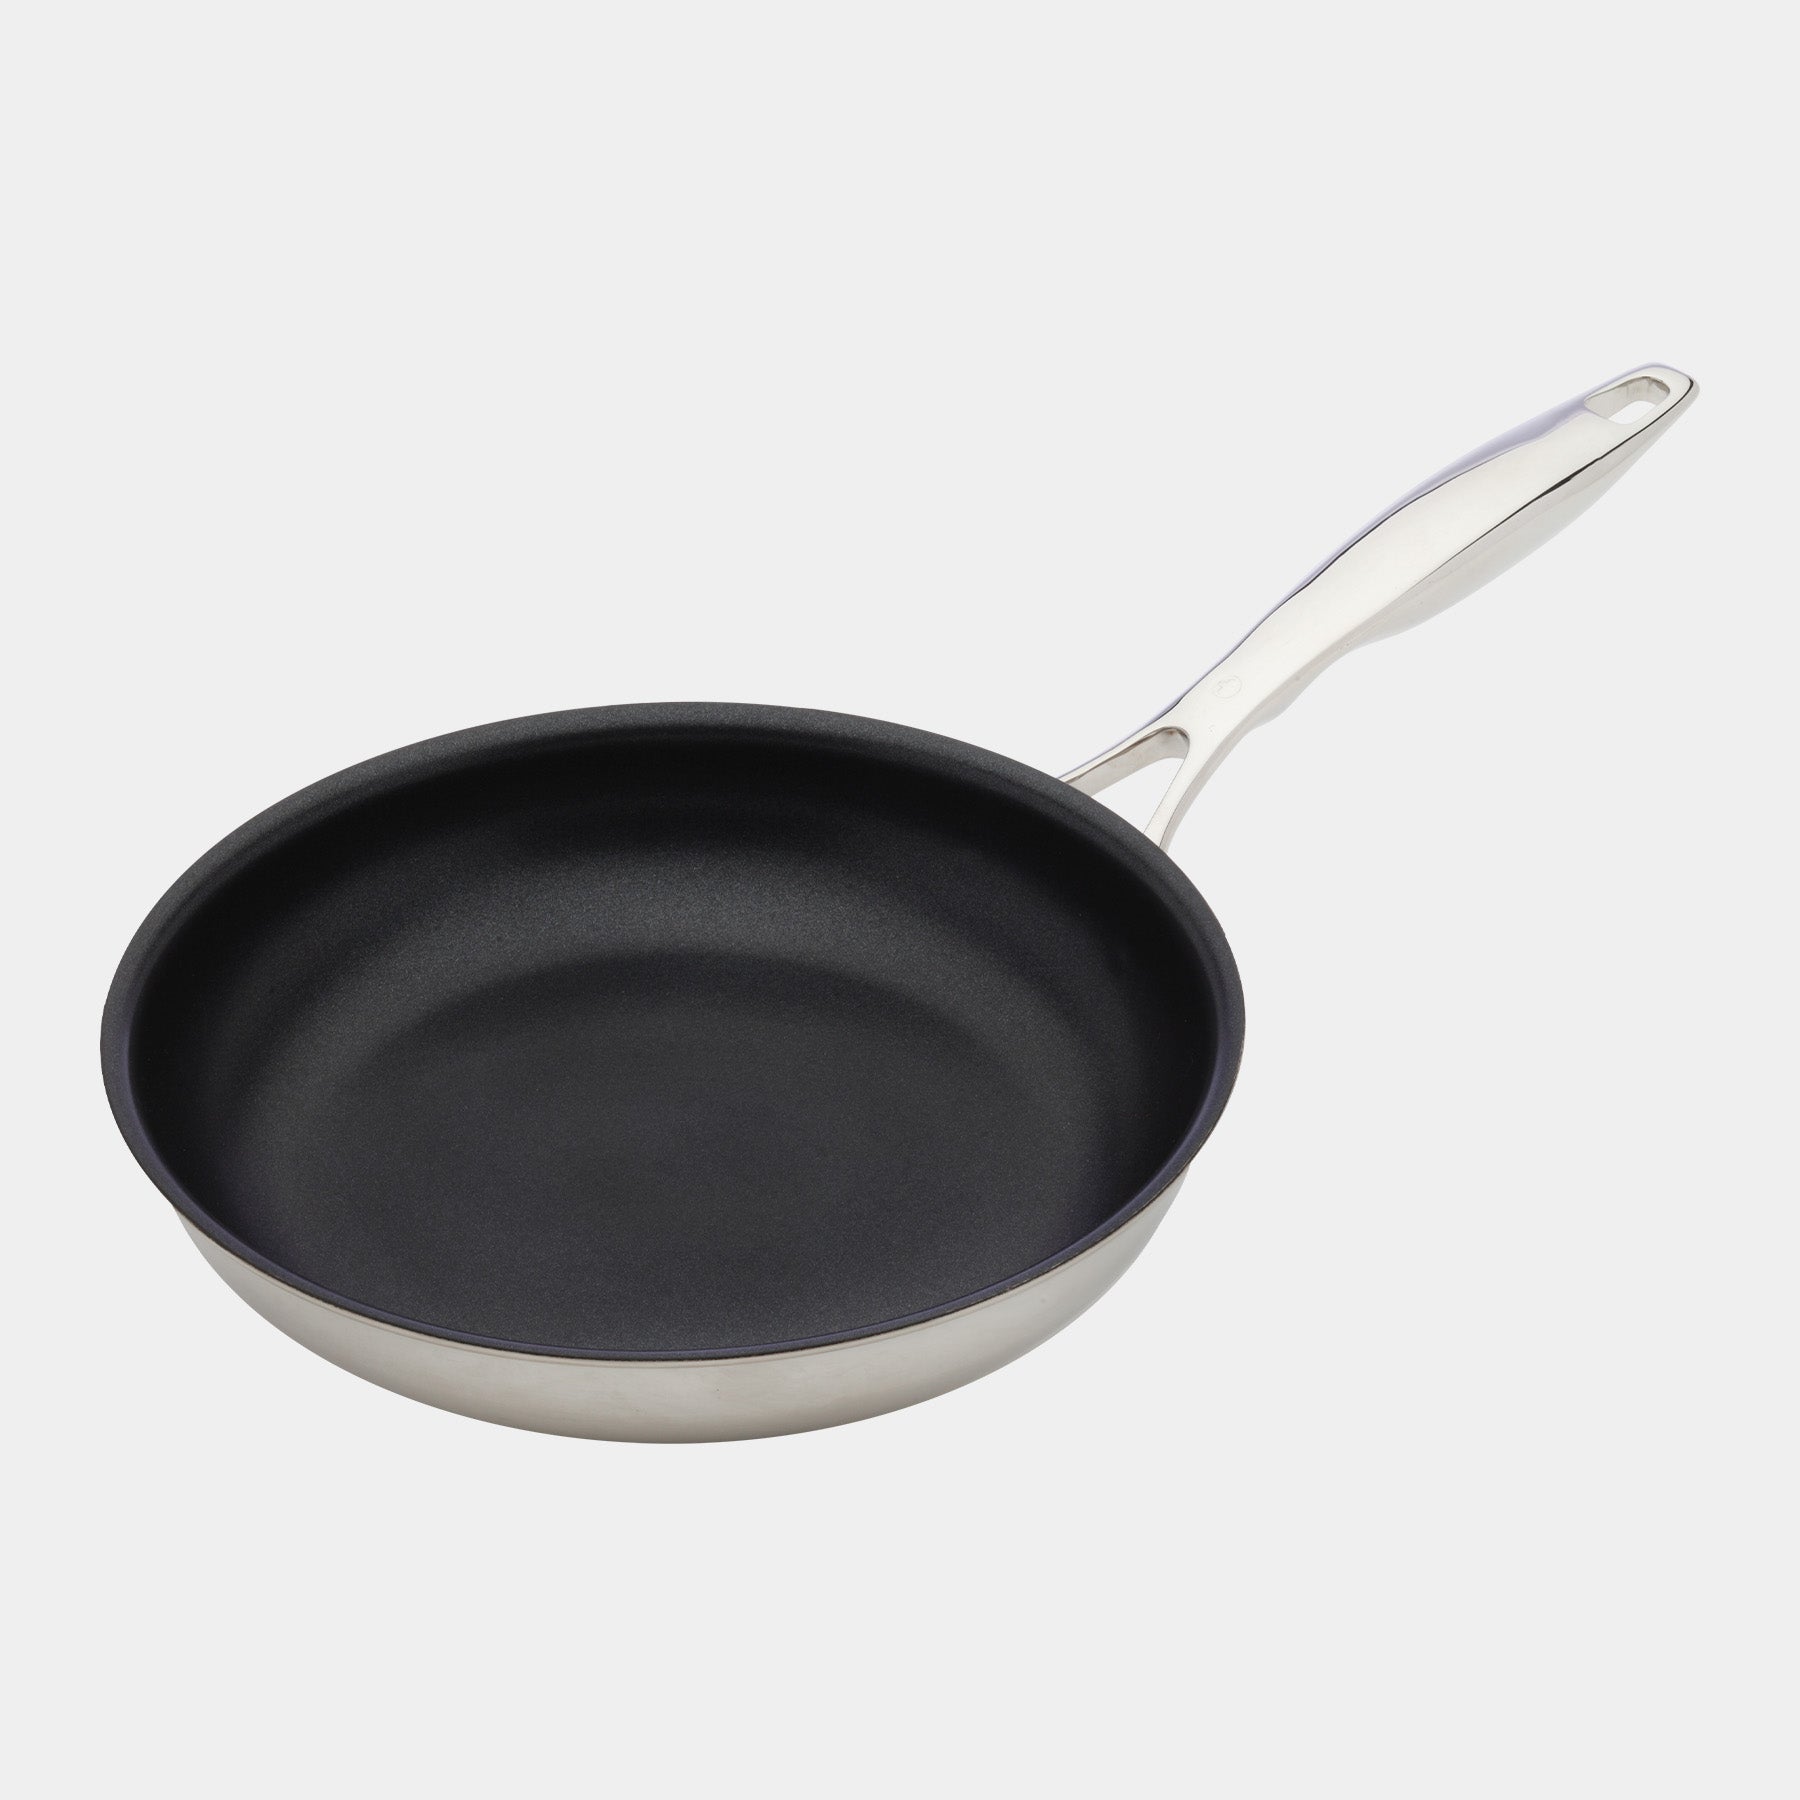 Nonstick Clad 9.5" Fry Pan - Induction